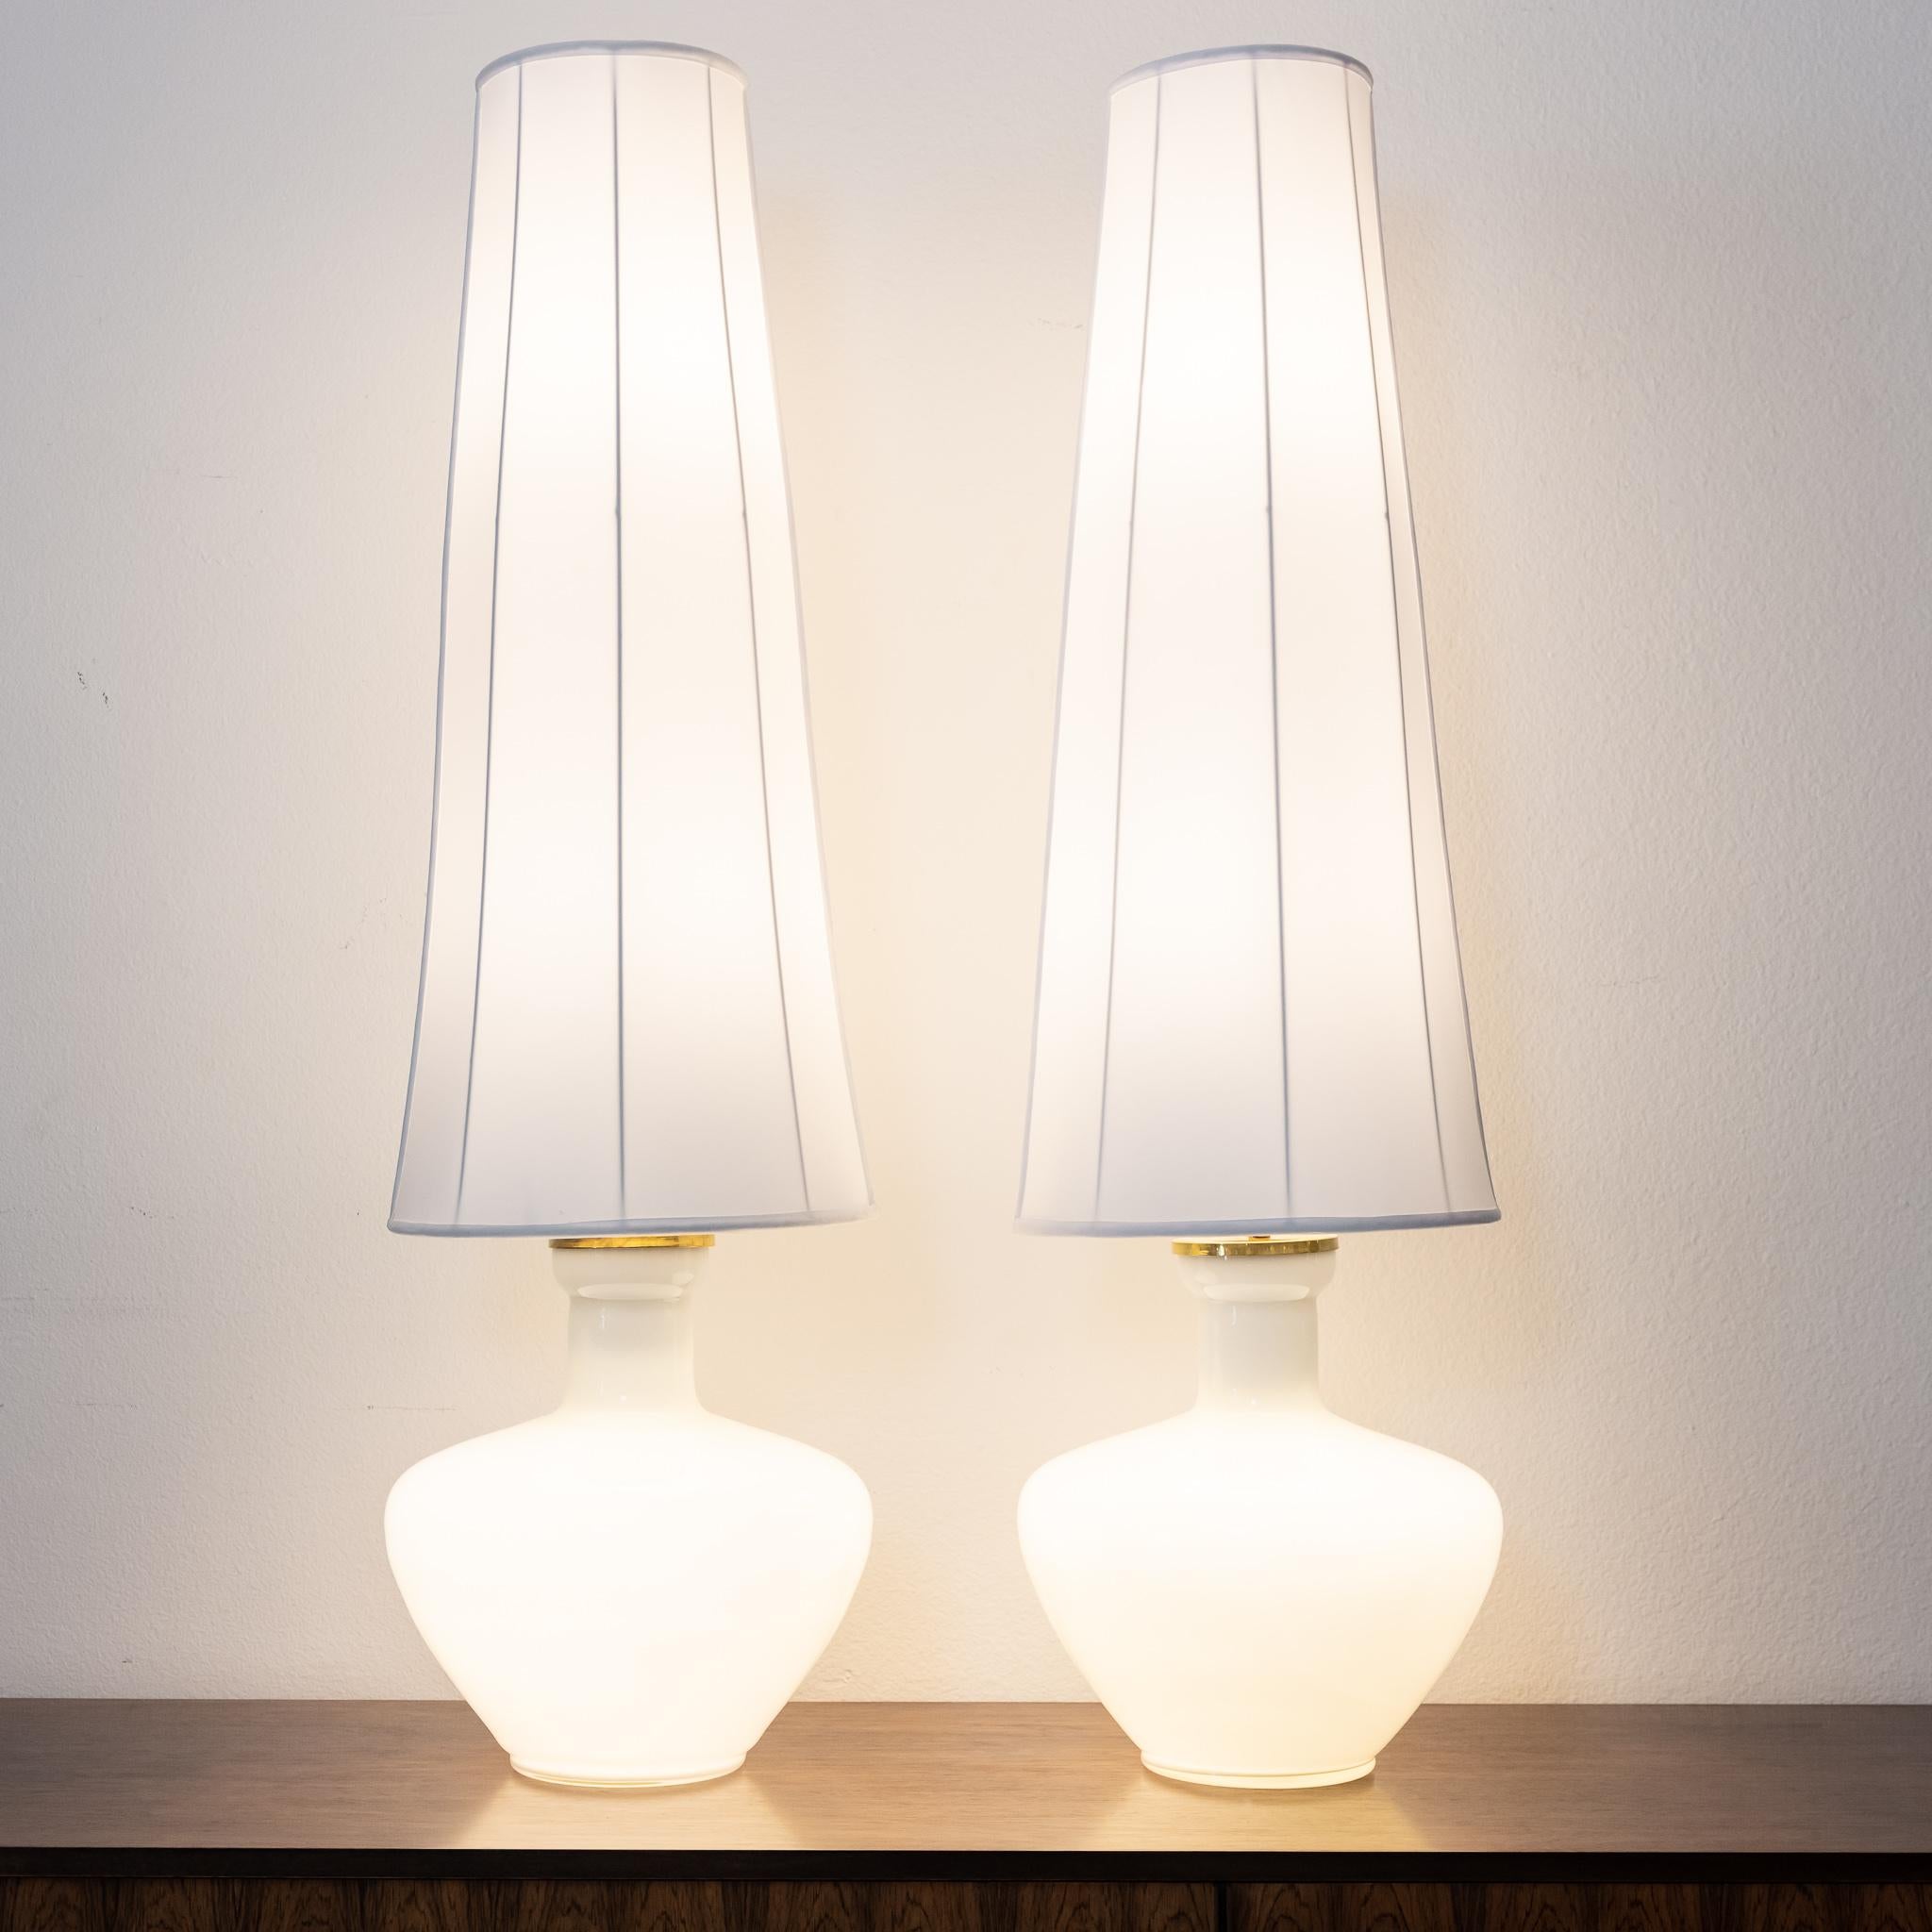 A unique and rare pair of lamps, circa 1940s, with Murano cased glass bases and original shade armatures. The new covering on the shades are beautiful hand sewn silk. A three way light switch illuminates the Murano bases, the lampshades or both